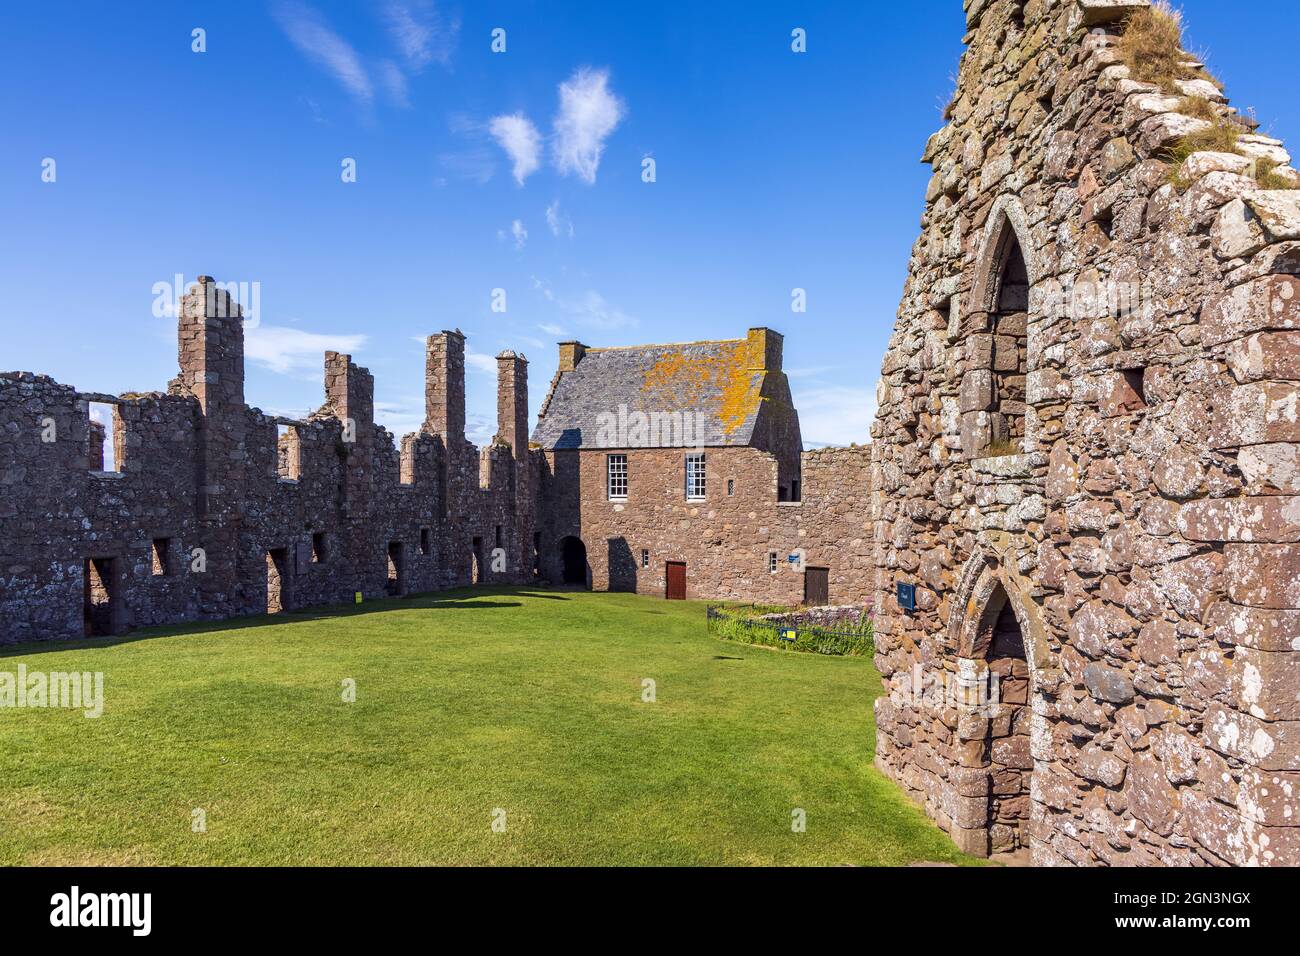 Remains of the medieval fortress, Dunnottar Castle, located upon a rocky headland on the north east coast of Scotland near Stonehaven, Aberdeenshire. Stock Photo